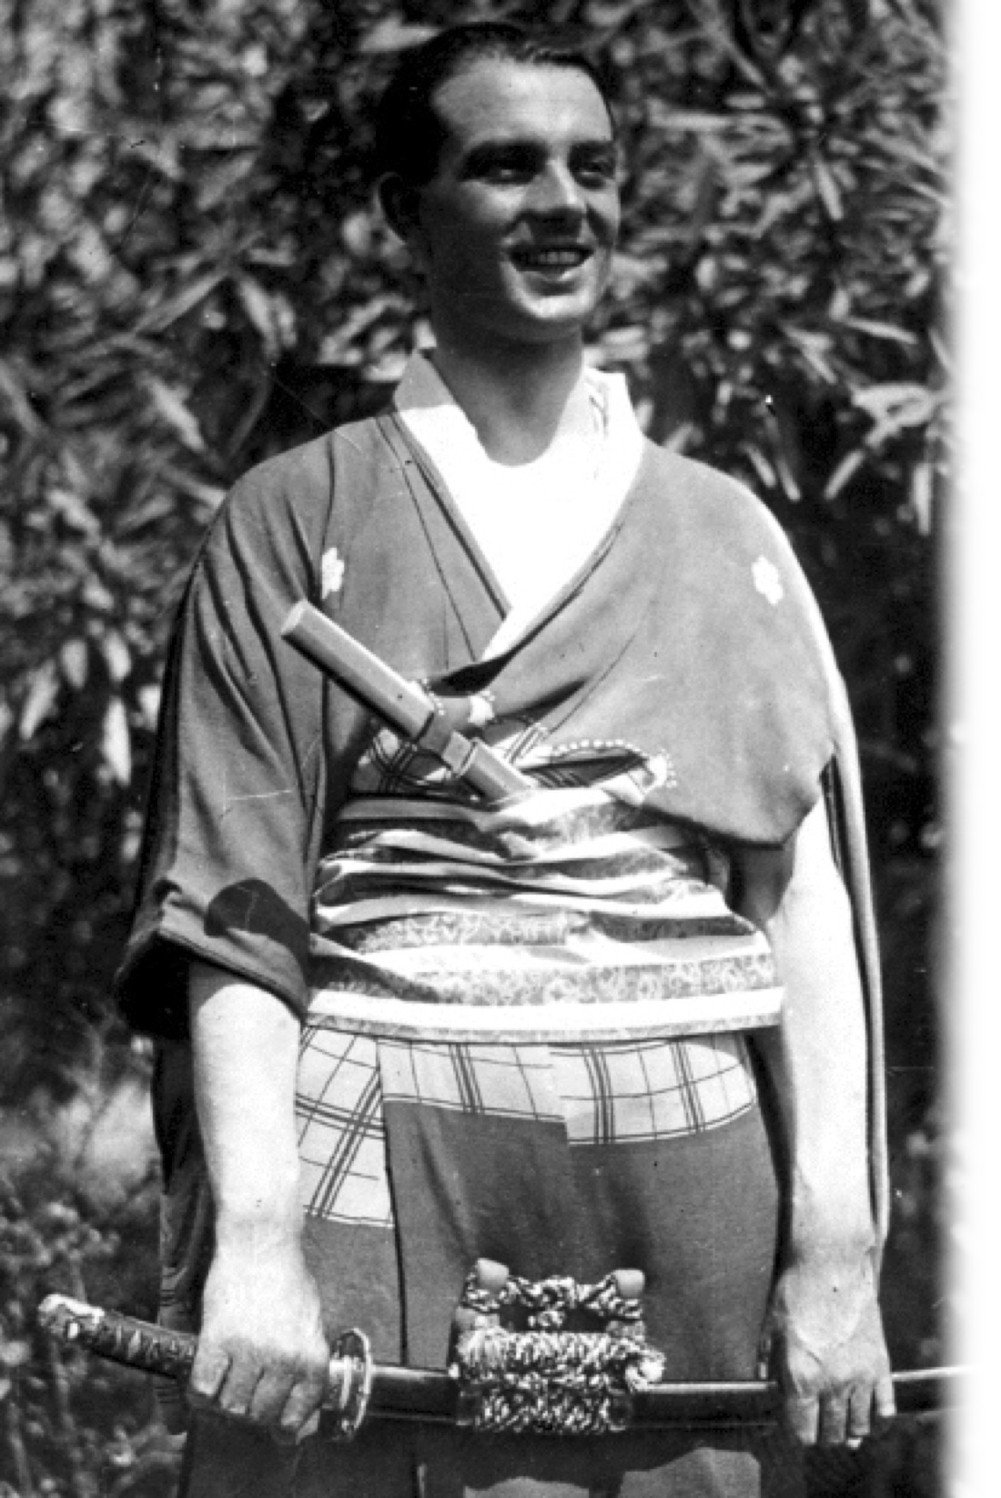 Pilot Arturo Ferrarin, who was the first person to fly from Europe to Japan, in a kimono given to him at the end of the Rome to Tokyo race.